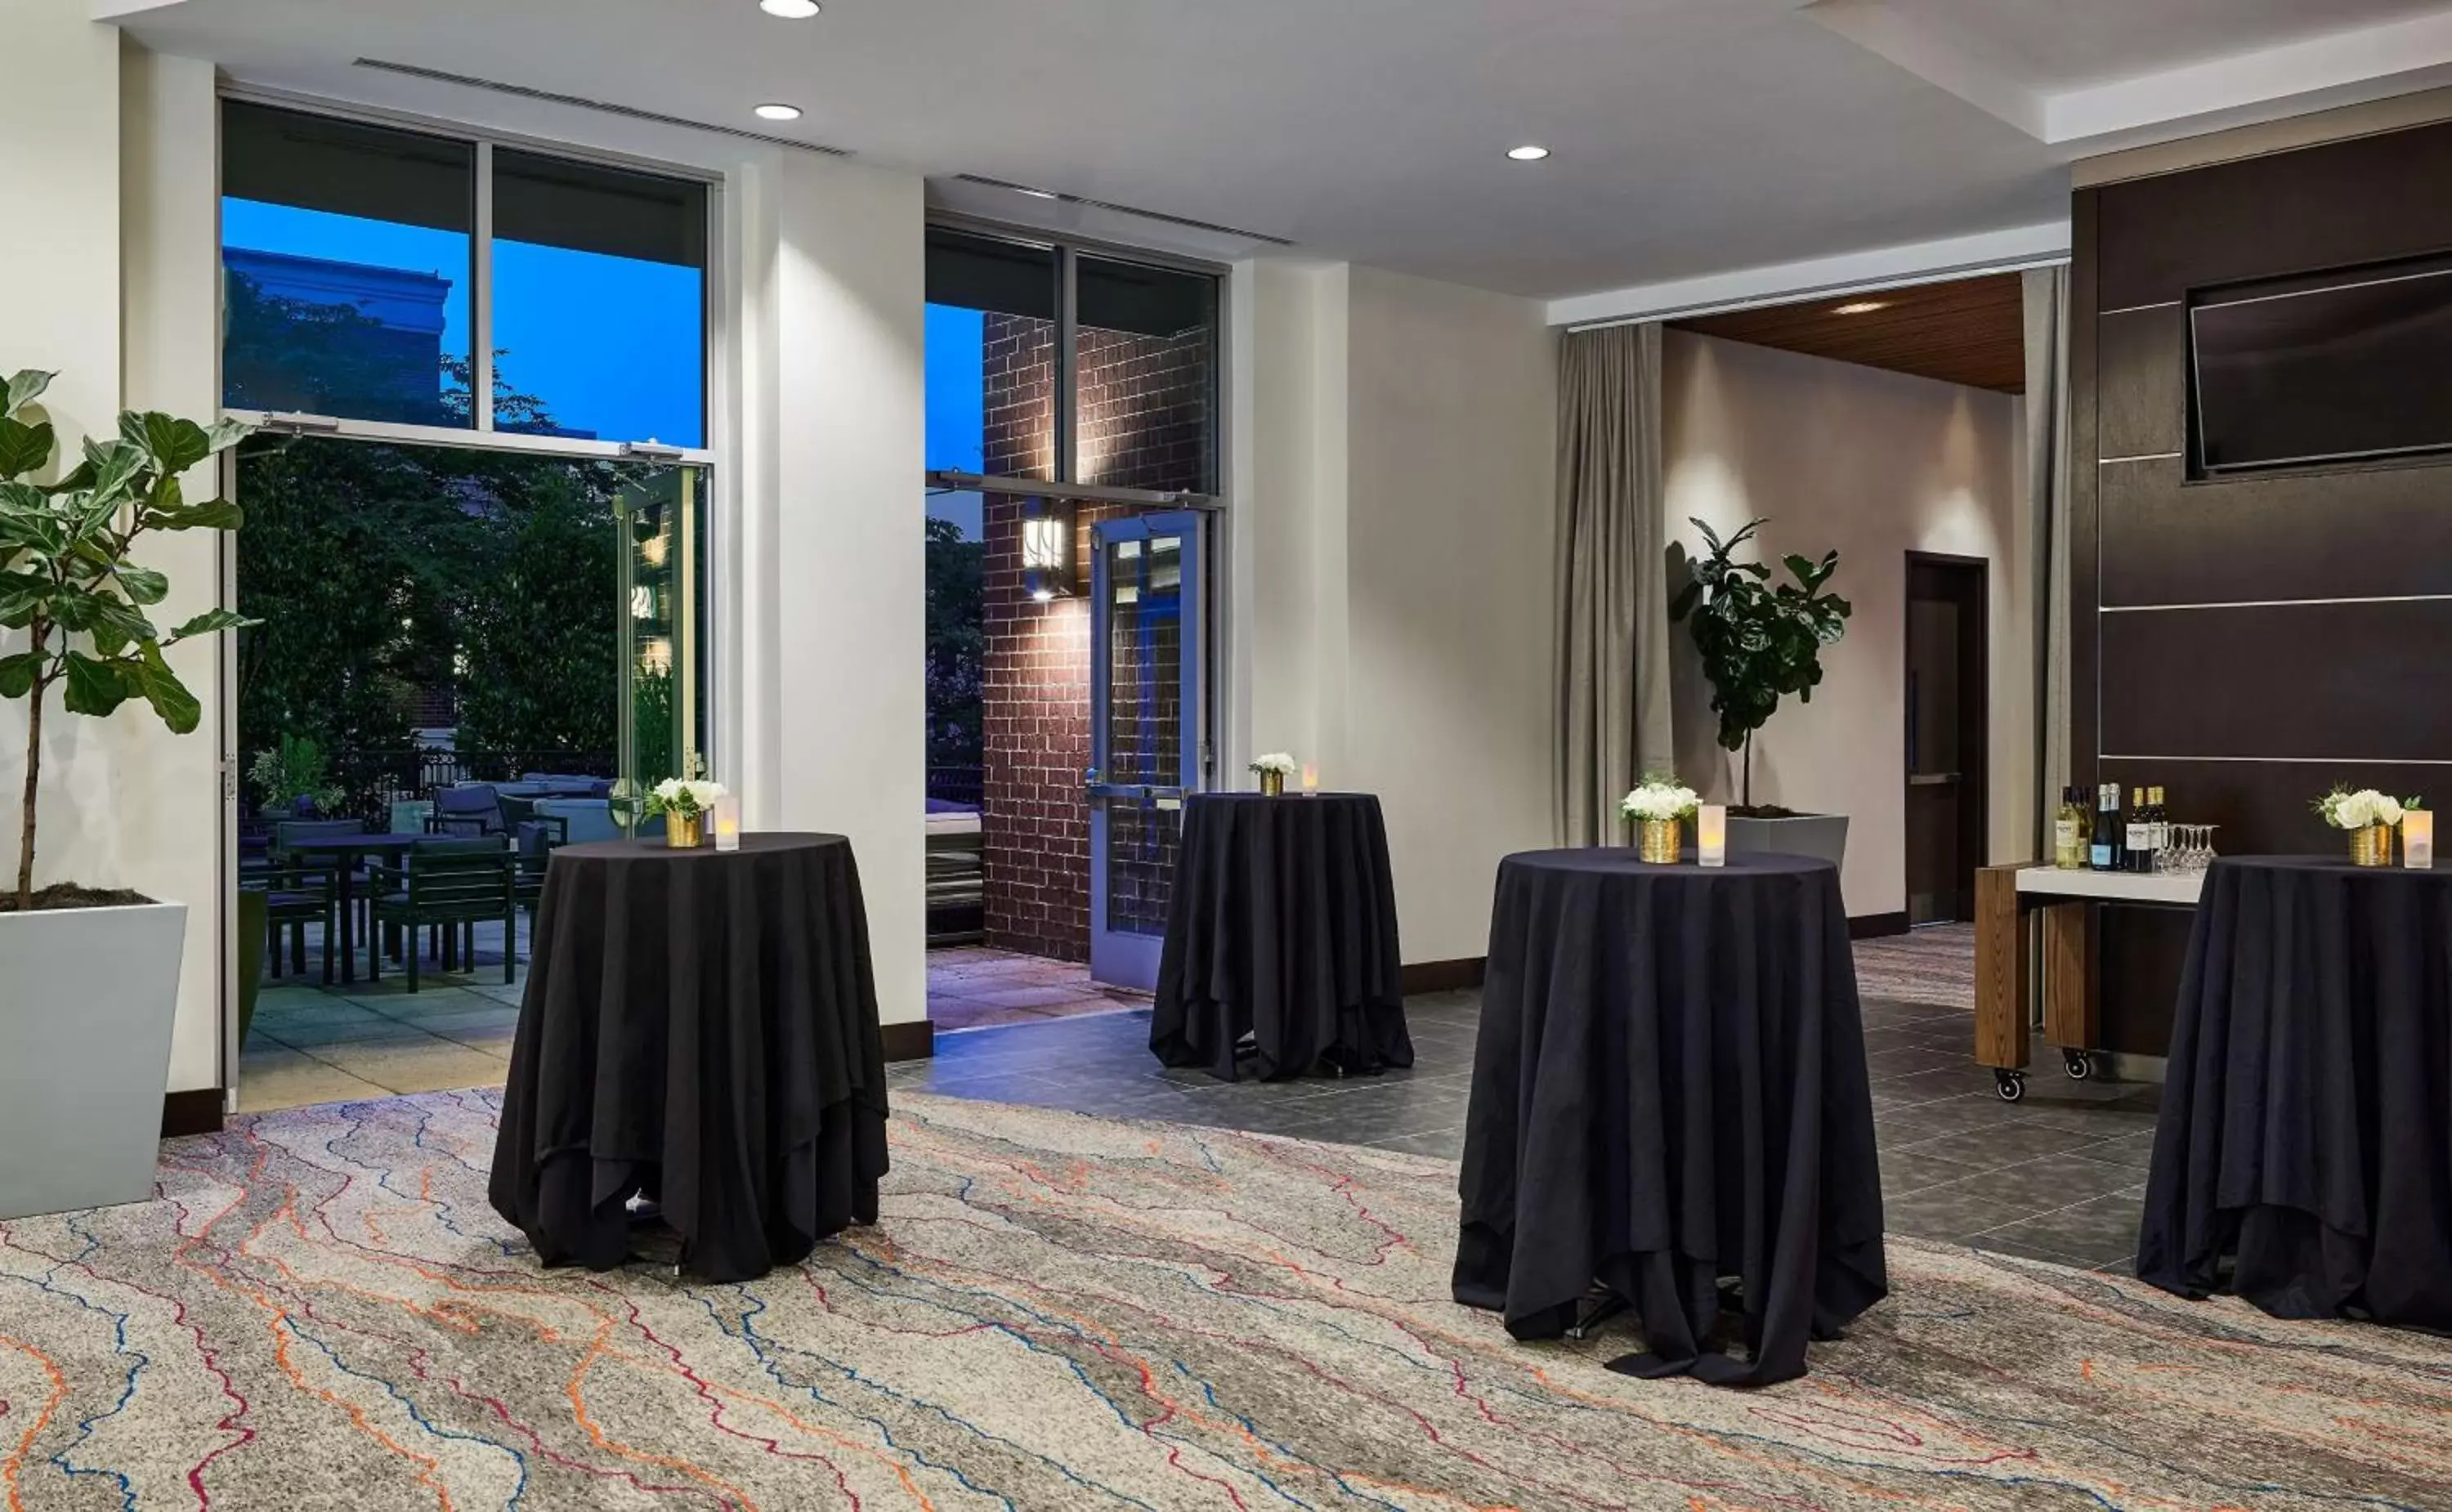 Meeting/conference room in Hilton Garden Inn Nashville Downtown/Convention Center